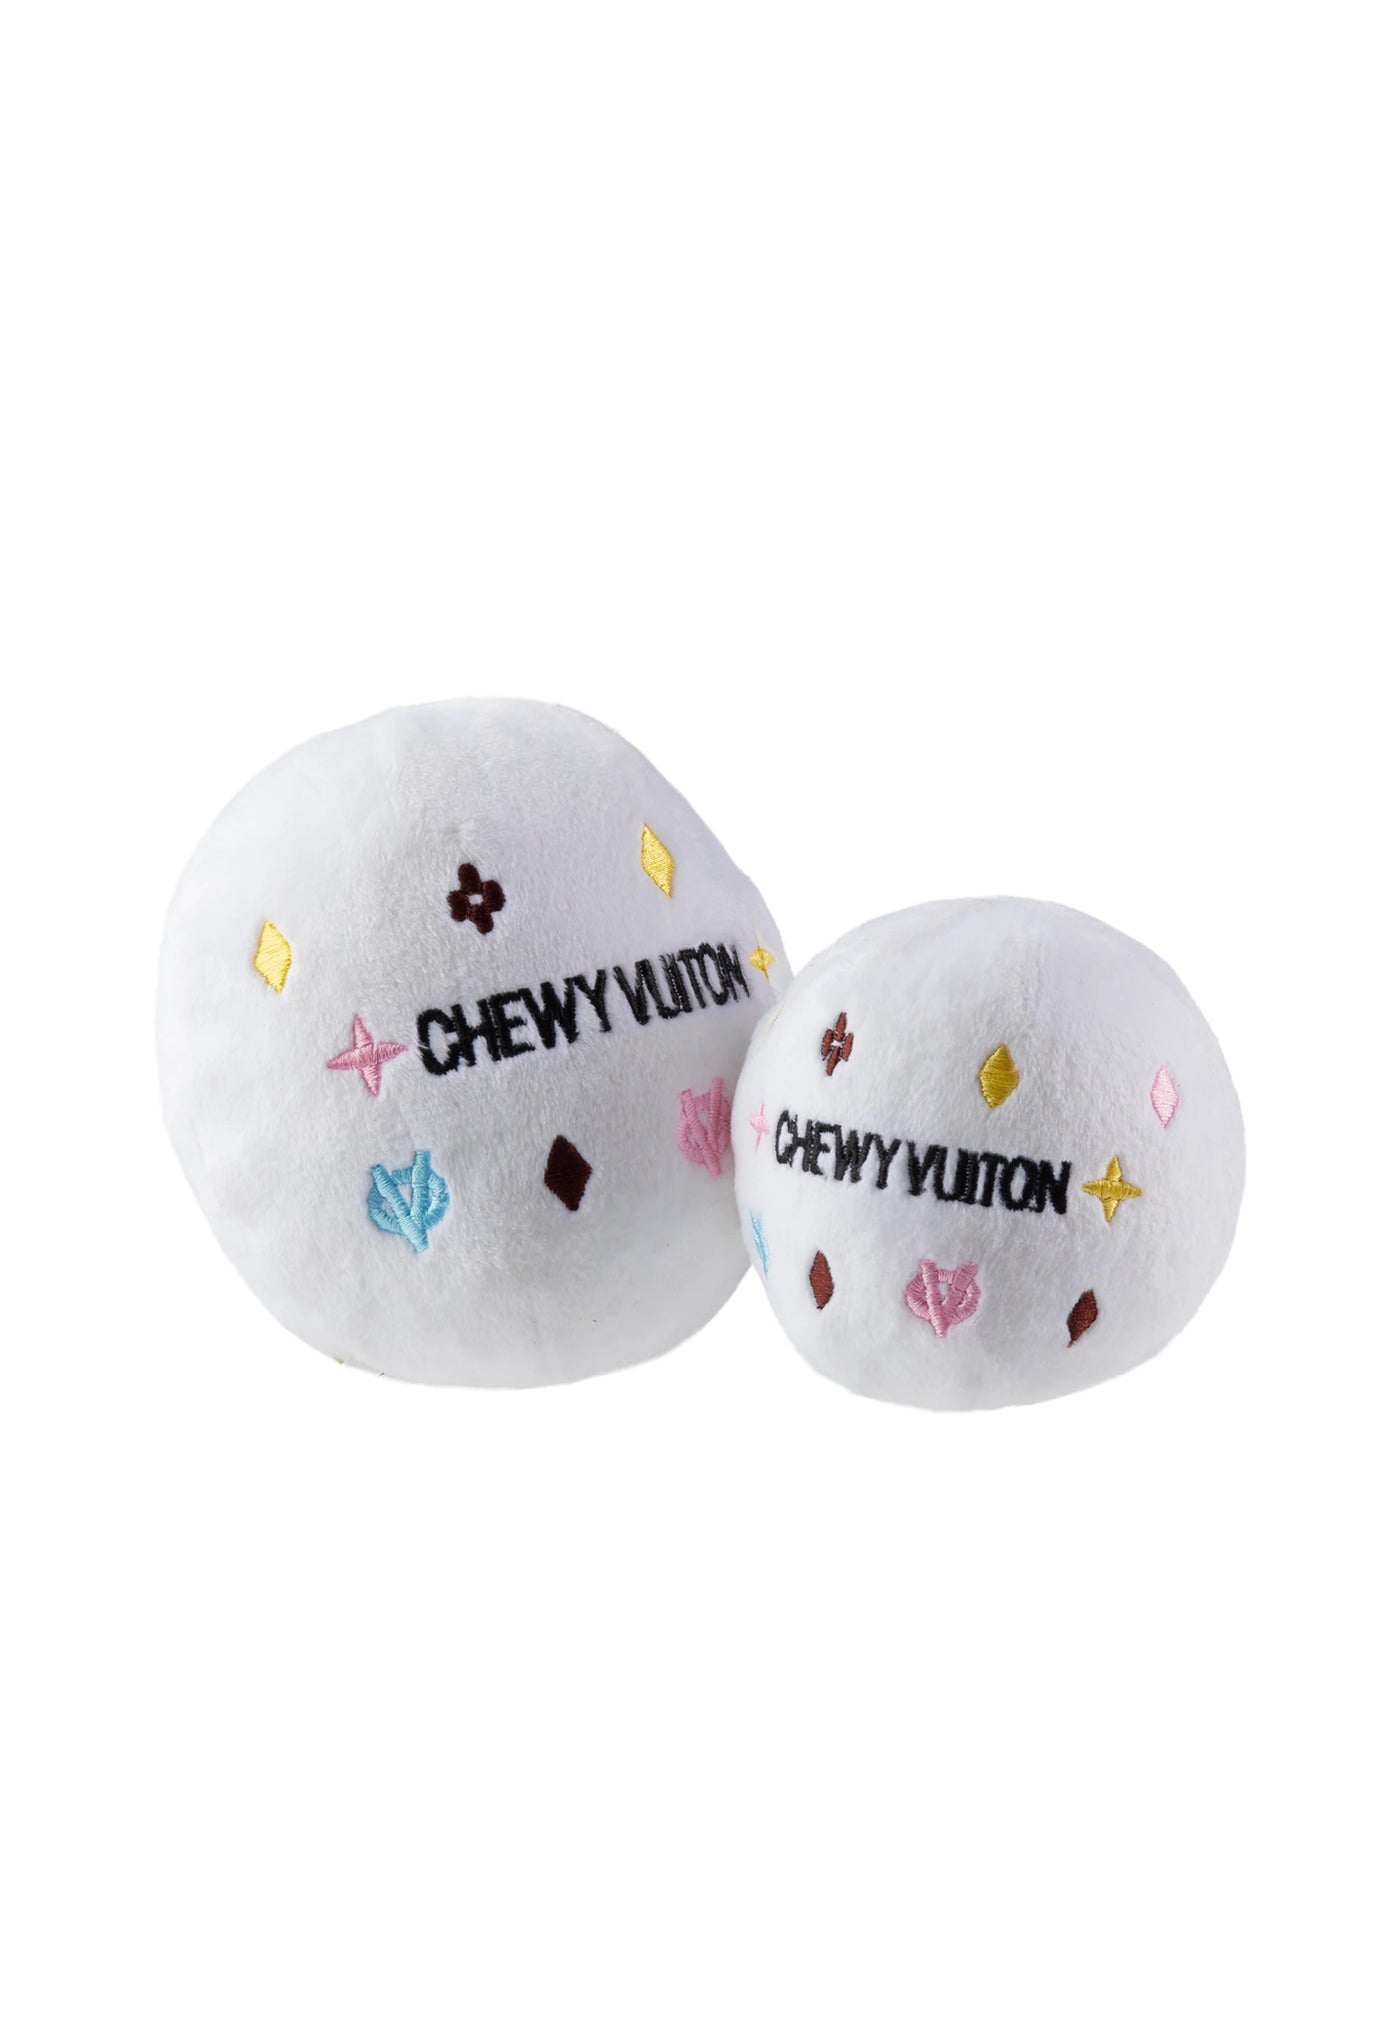 Chewy Vuiton Ball - White sold by Angel Divine